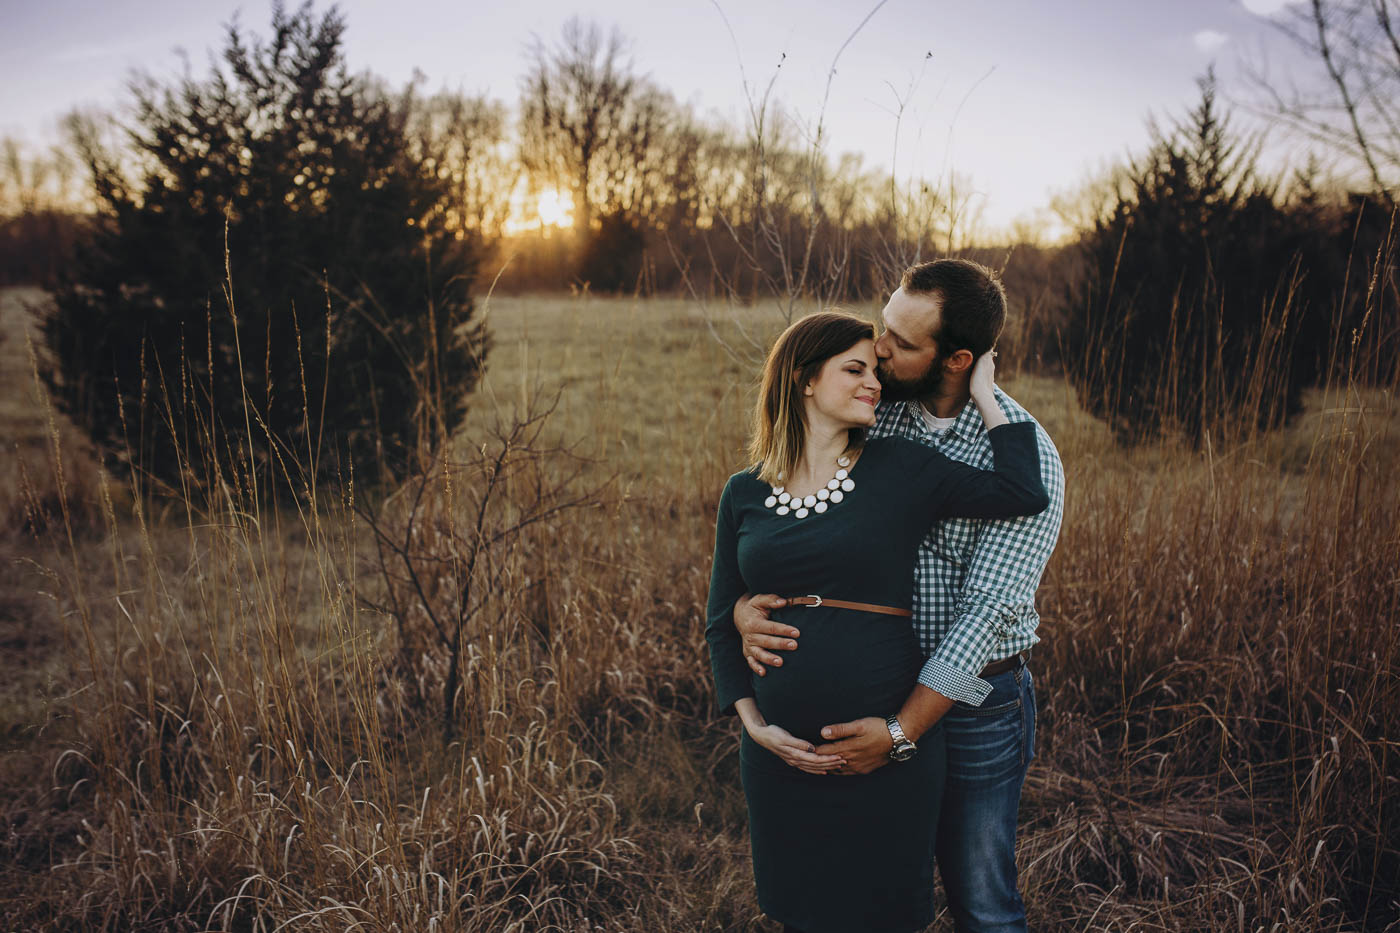 Sweet couple sharing a moment at their maternity photography session.